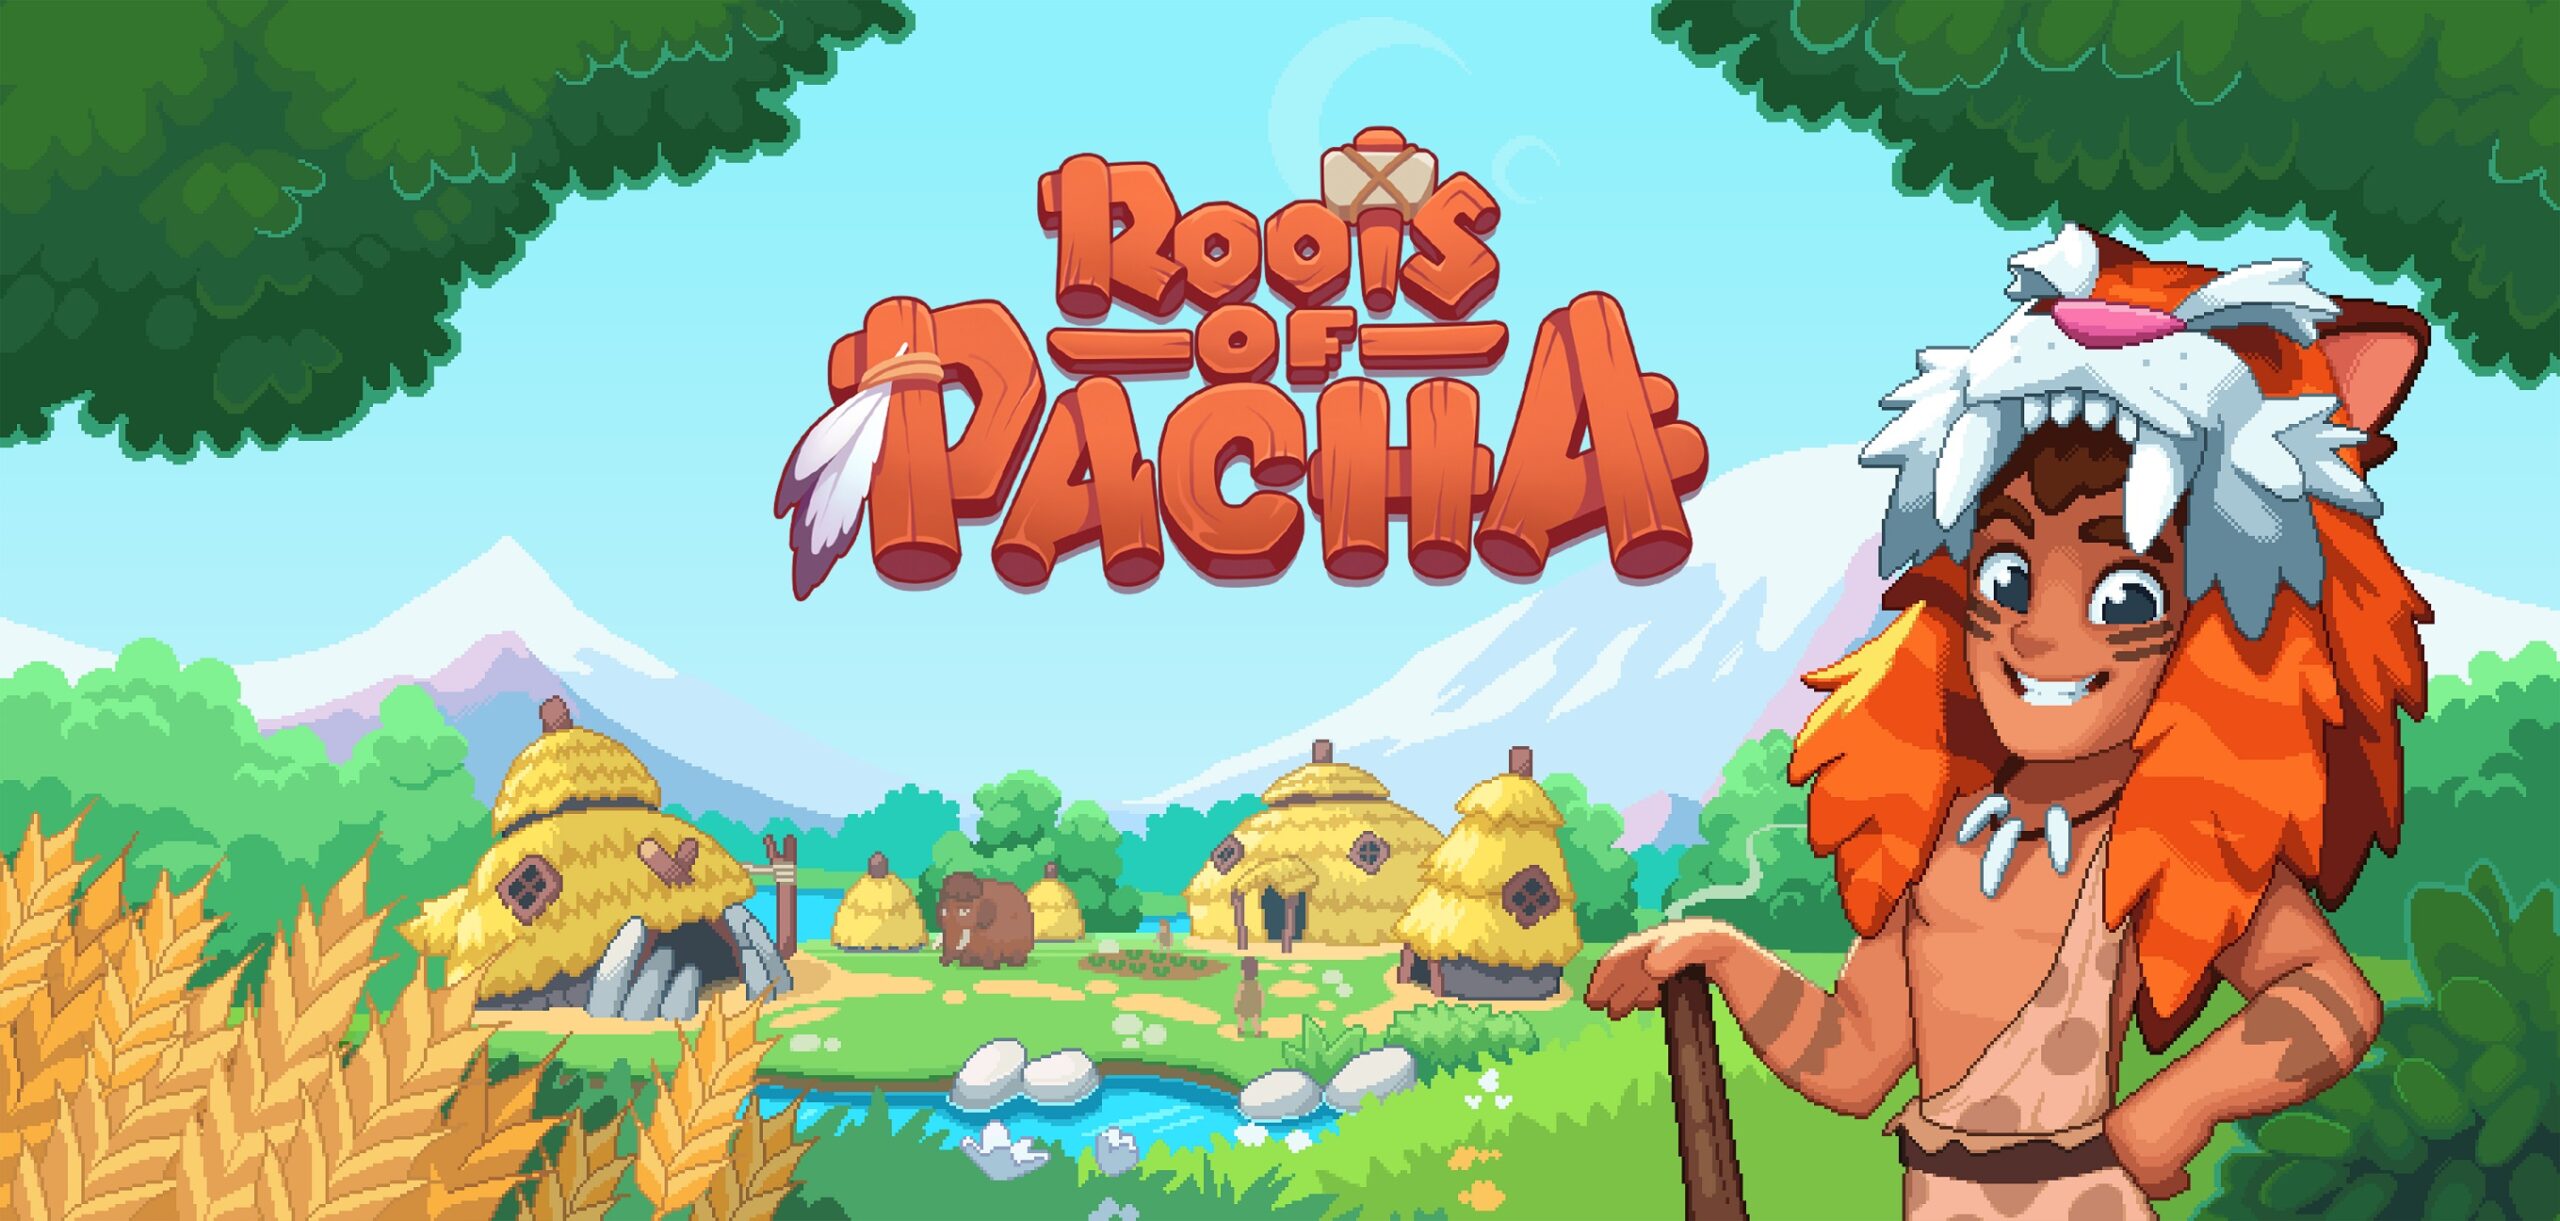 Stone Age farm sim Roots of Pacha arriving on Xbox, alongside a big update